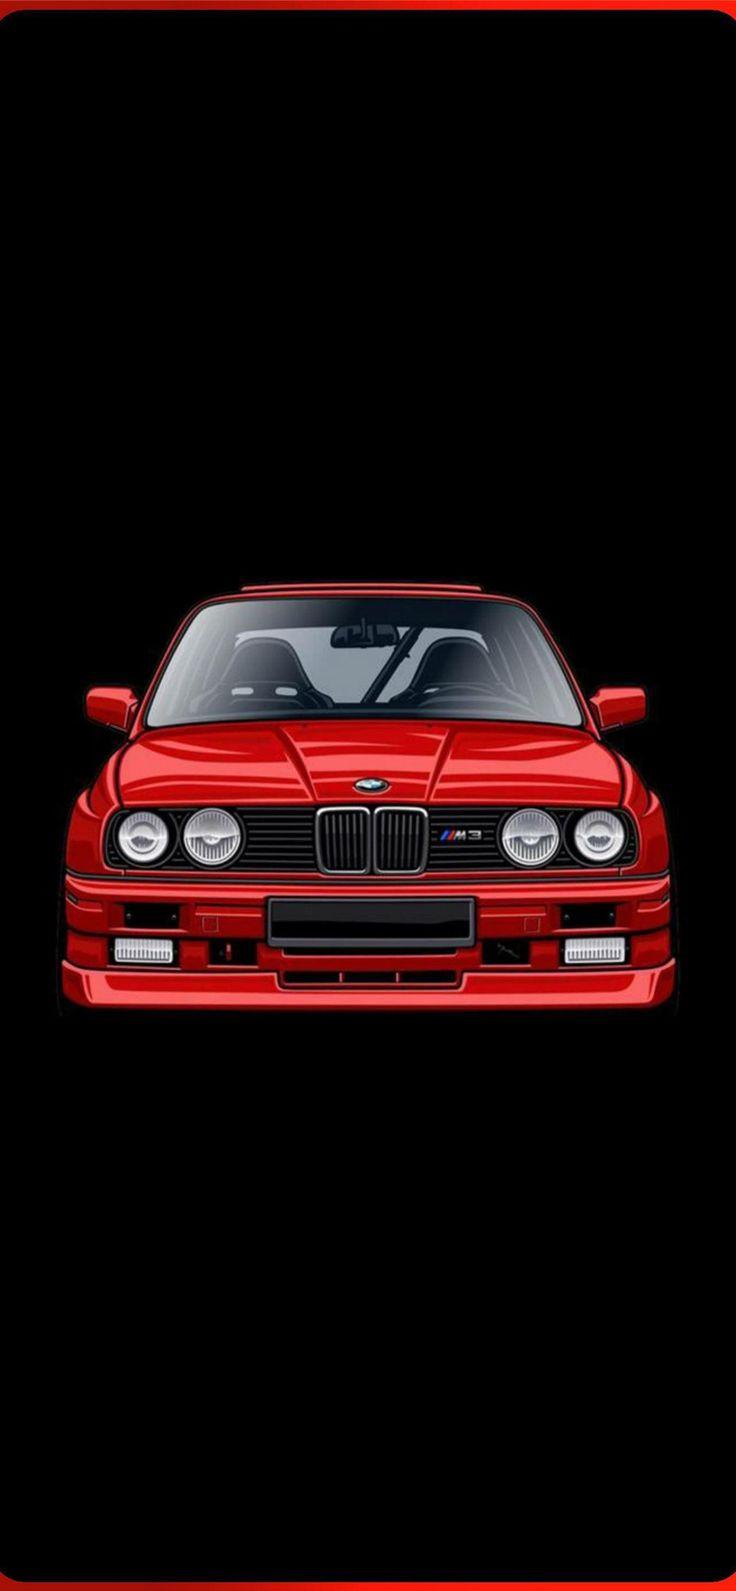 For My Car Guys Our There Bmw E30 M3 Note10 Bmwe30m3